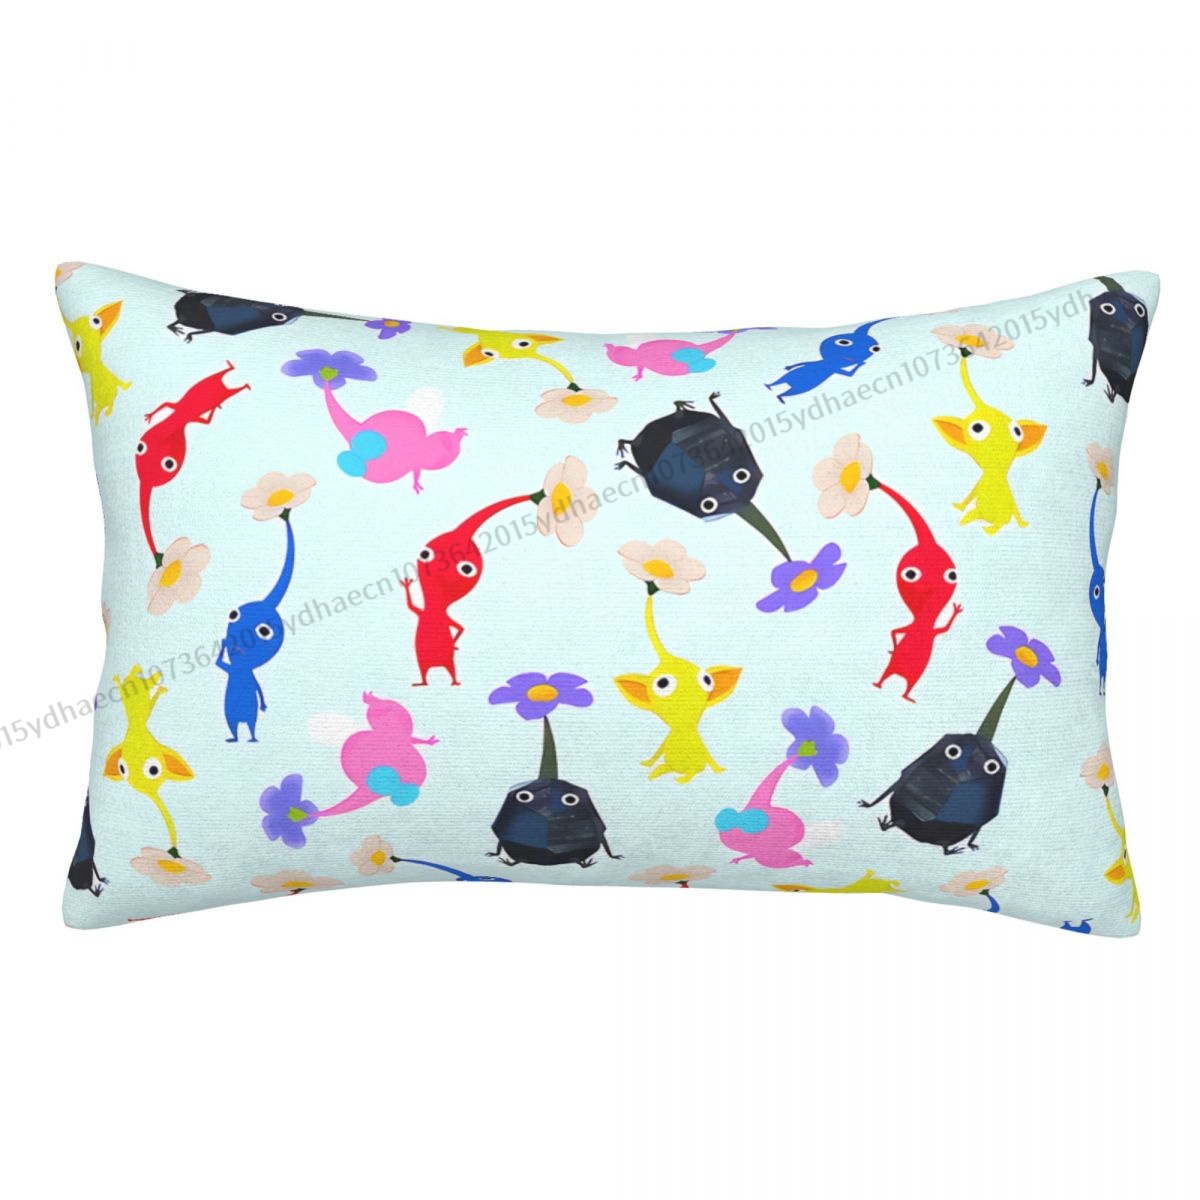 Characters Cojines Pillowcase Pikmin Game Cushion Home Sofa Chair Print Decorative Coussin Pillow Covers - Pikmin Plush